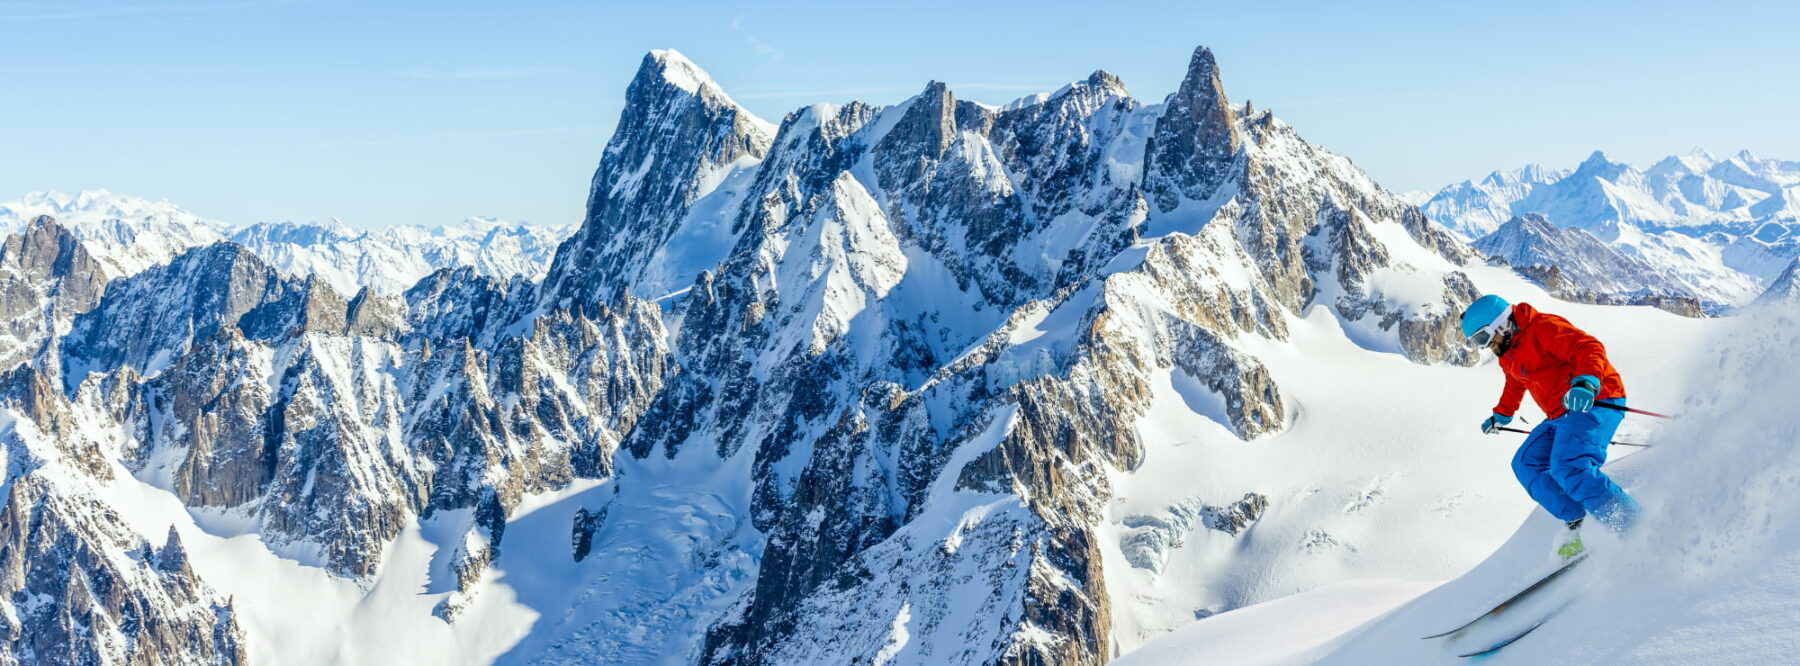 A Guide to Off-Piste Skiing in Chamonix With Maison Sport